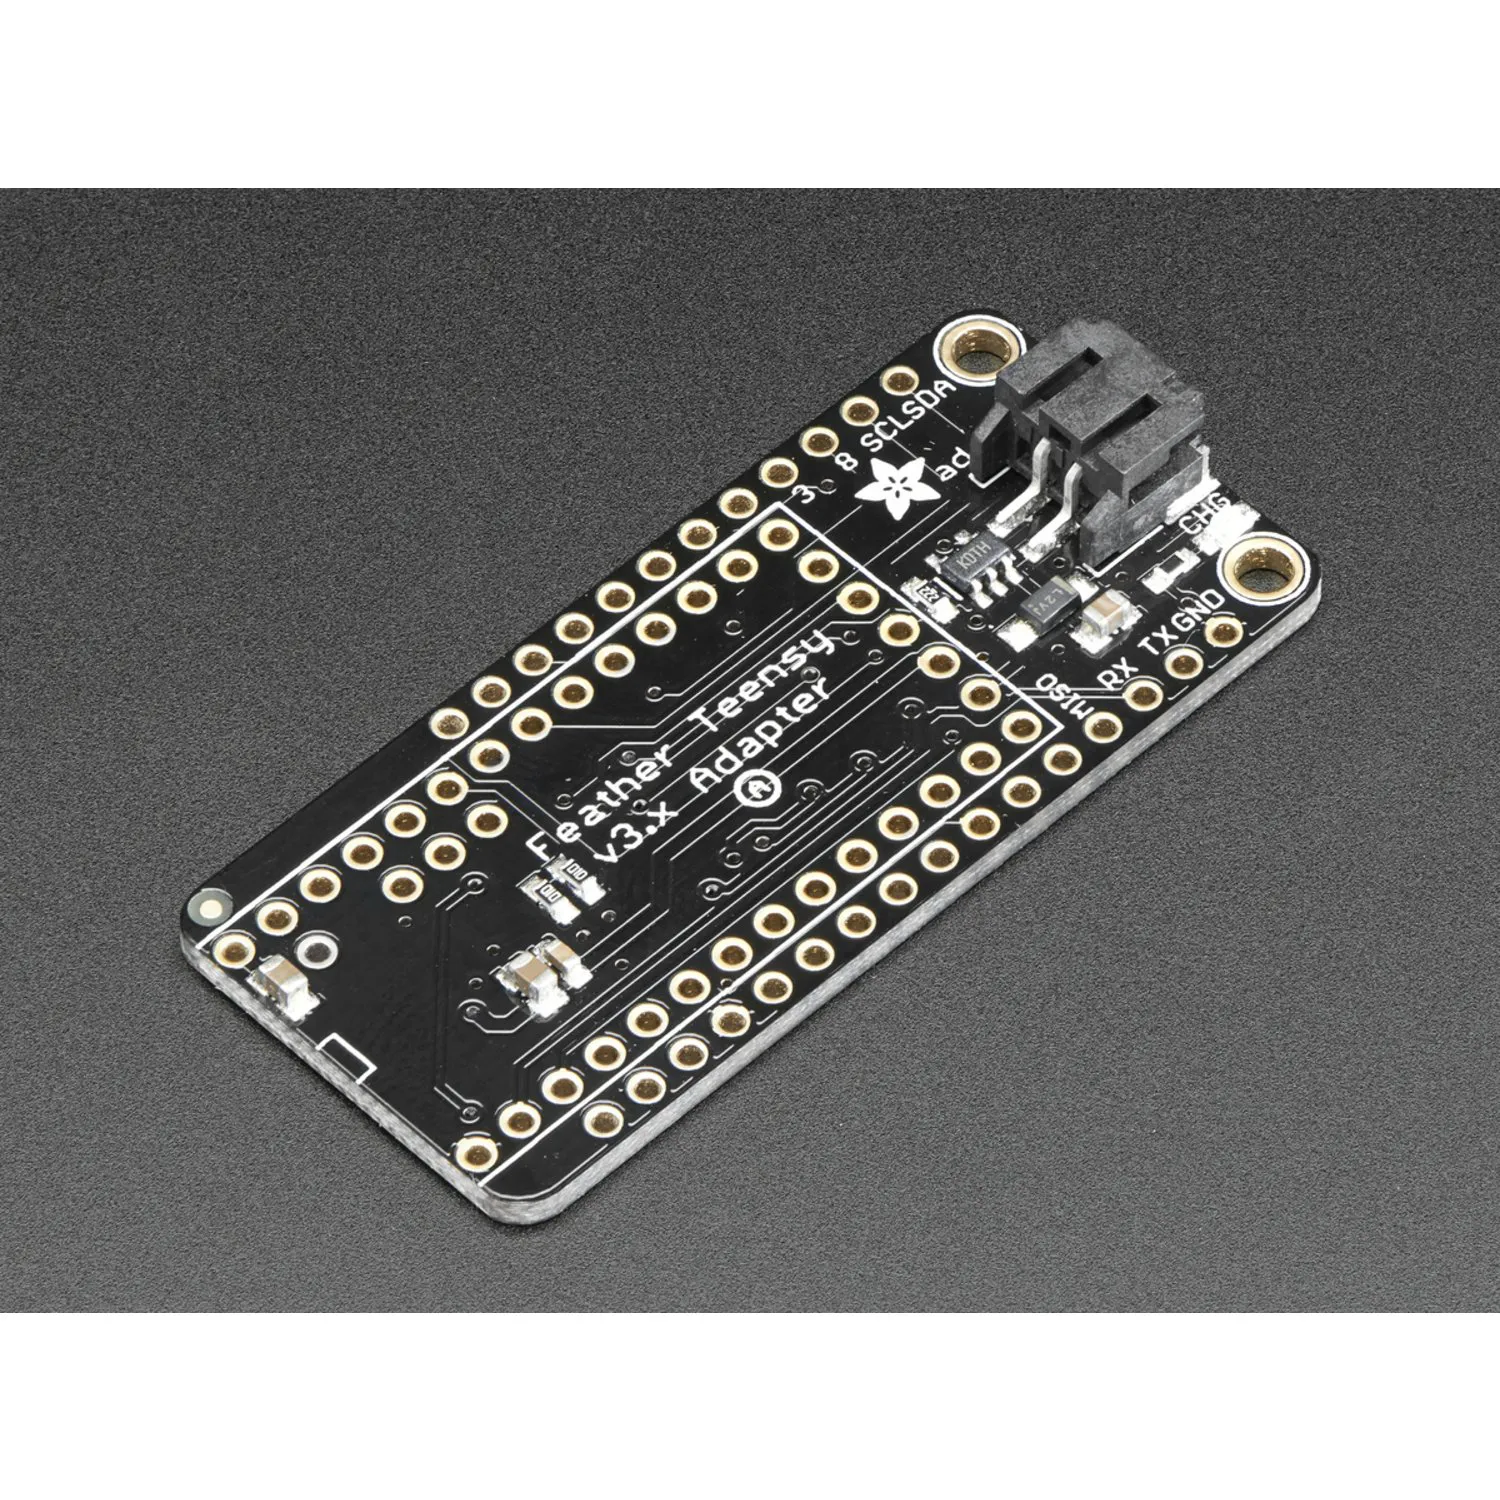 Photo of Teensy 3.x Feather Adapter